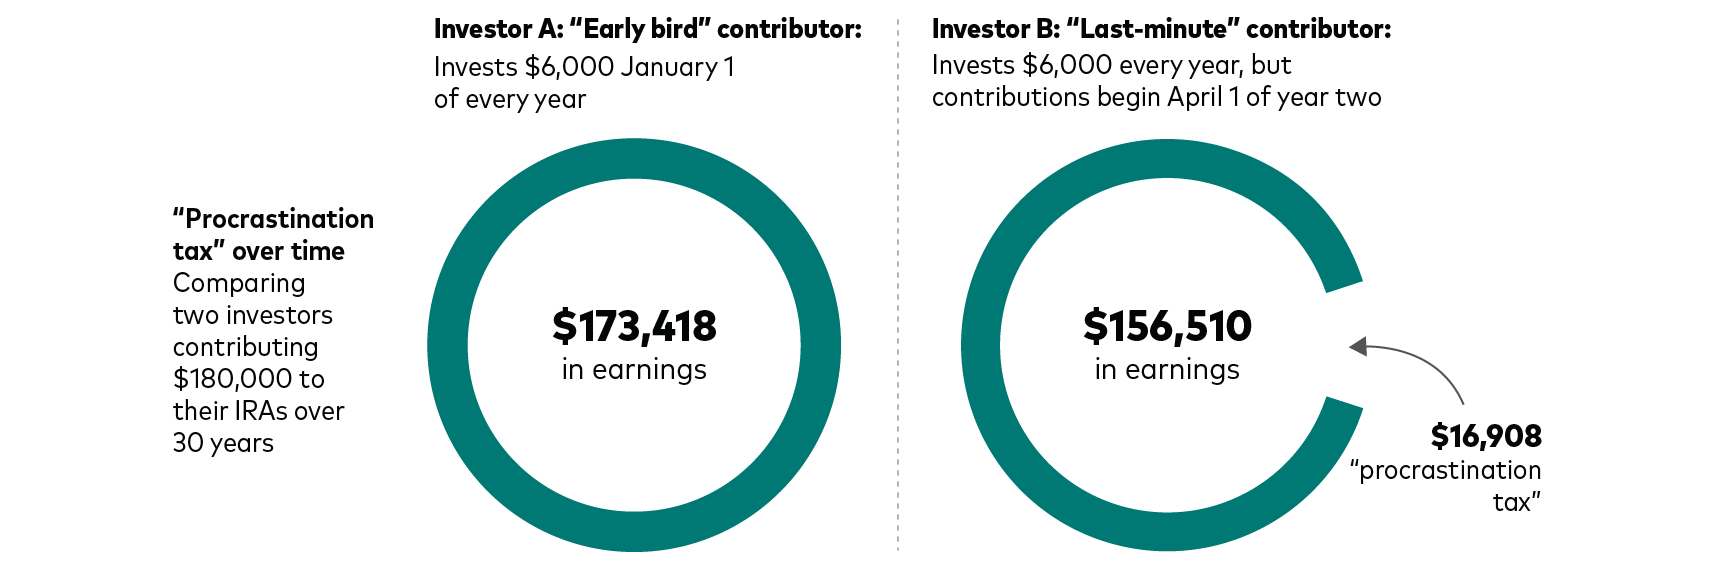 This chart shows a hypothetical example. The “early bird” investor contributes on January 1 of the tax year; the “last-minute” investor contributes on April 1 of the following year. This example assumes that each investor contributes $6,000 for 30 years and earns a 4% return annually after inflation. After 30 years, the early bird investor has accumulated $173,418 in earnings--$16,908 more in earnings than the “last-minute” investor who accumulates $156,510. Each investor contributes a total of $180,000 over the 30-year period, and the $16,908 difference in earnings can be seen as a “procrastination tax” for the last-minute investor. Projected balances are as of April of the ending year when the last-minute investor makes the final contribution. This hypothetical example does not represent the return on any particular investment and the rate is not guaranteed.